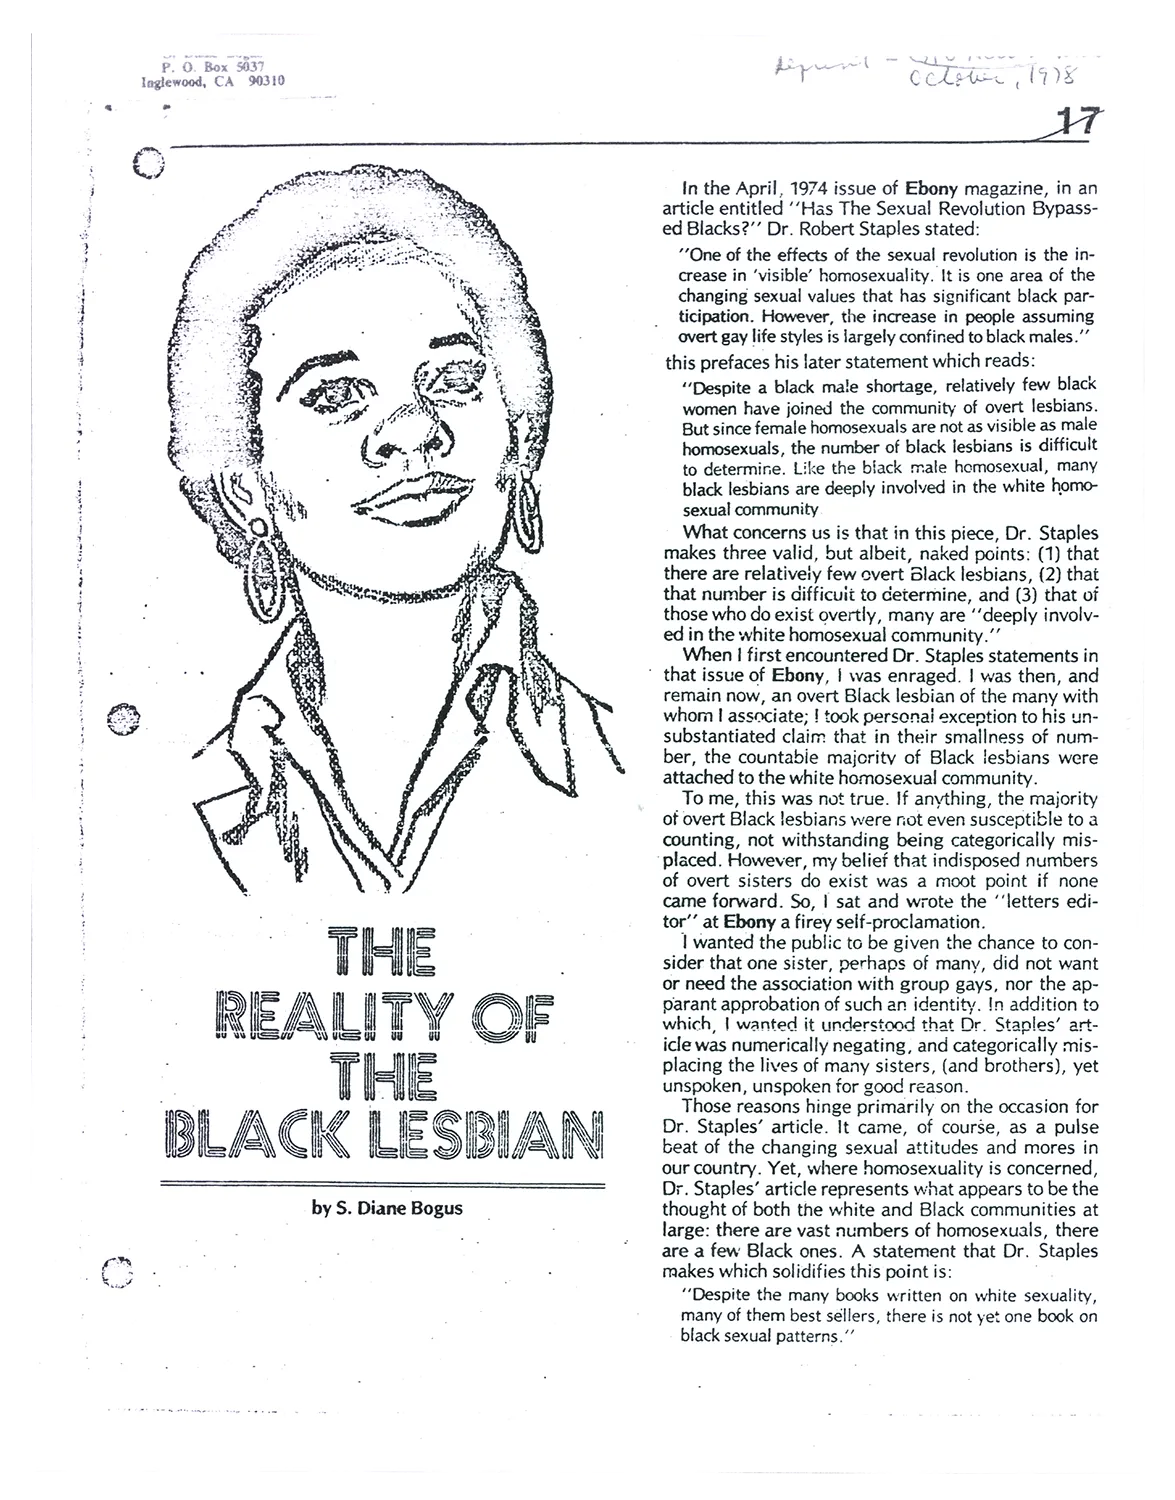 White paper with typewritten black text in two columns. In the left column is an illustration of SDiane Bogus smiling. Underneath the illustration is the title.